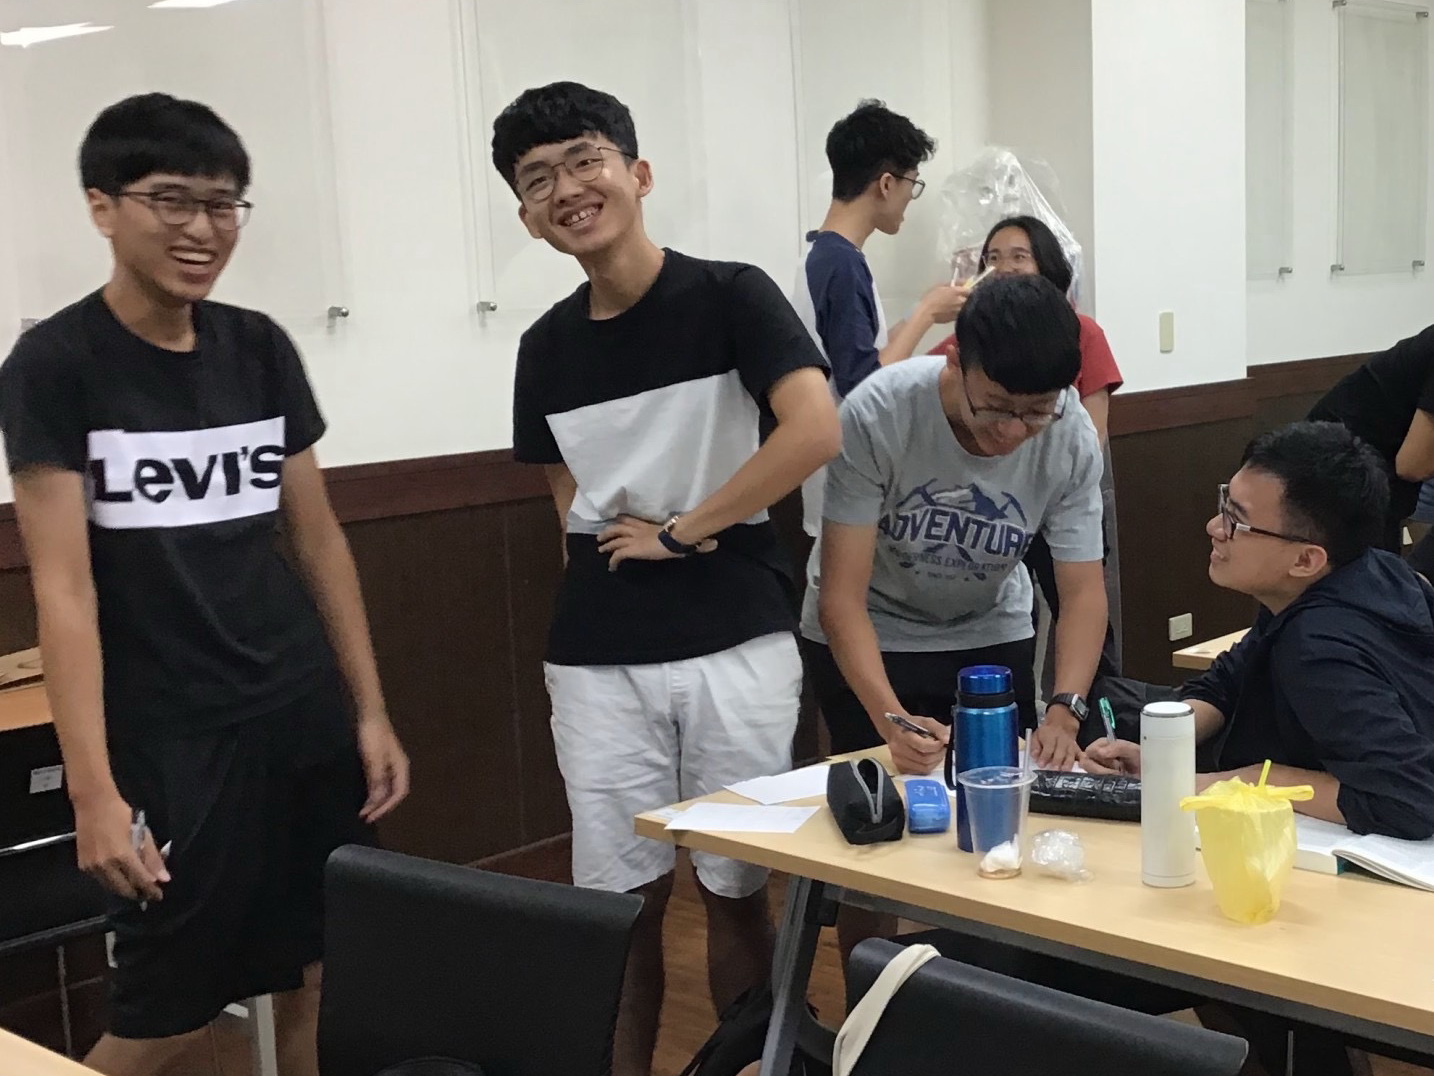 Asia University graduate Yu-Kai Chang (2nd from the left) from the Department of Occupational Therapy topped this year's national examination for occupational therapists among fresh graduates. The picture captures him engaged in group discussions with classmates during a class at Asia University